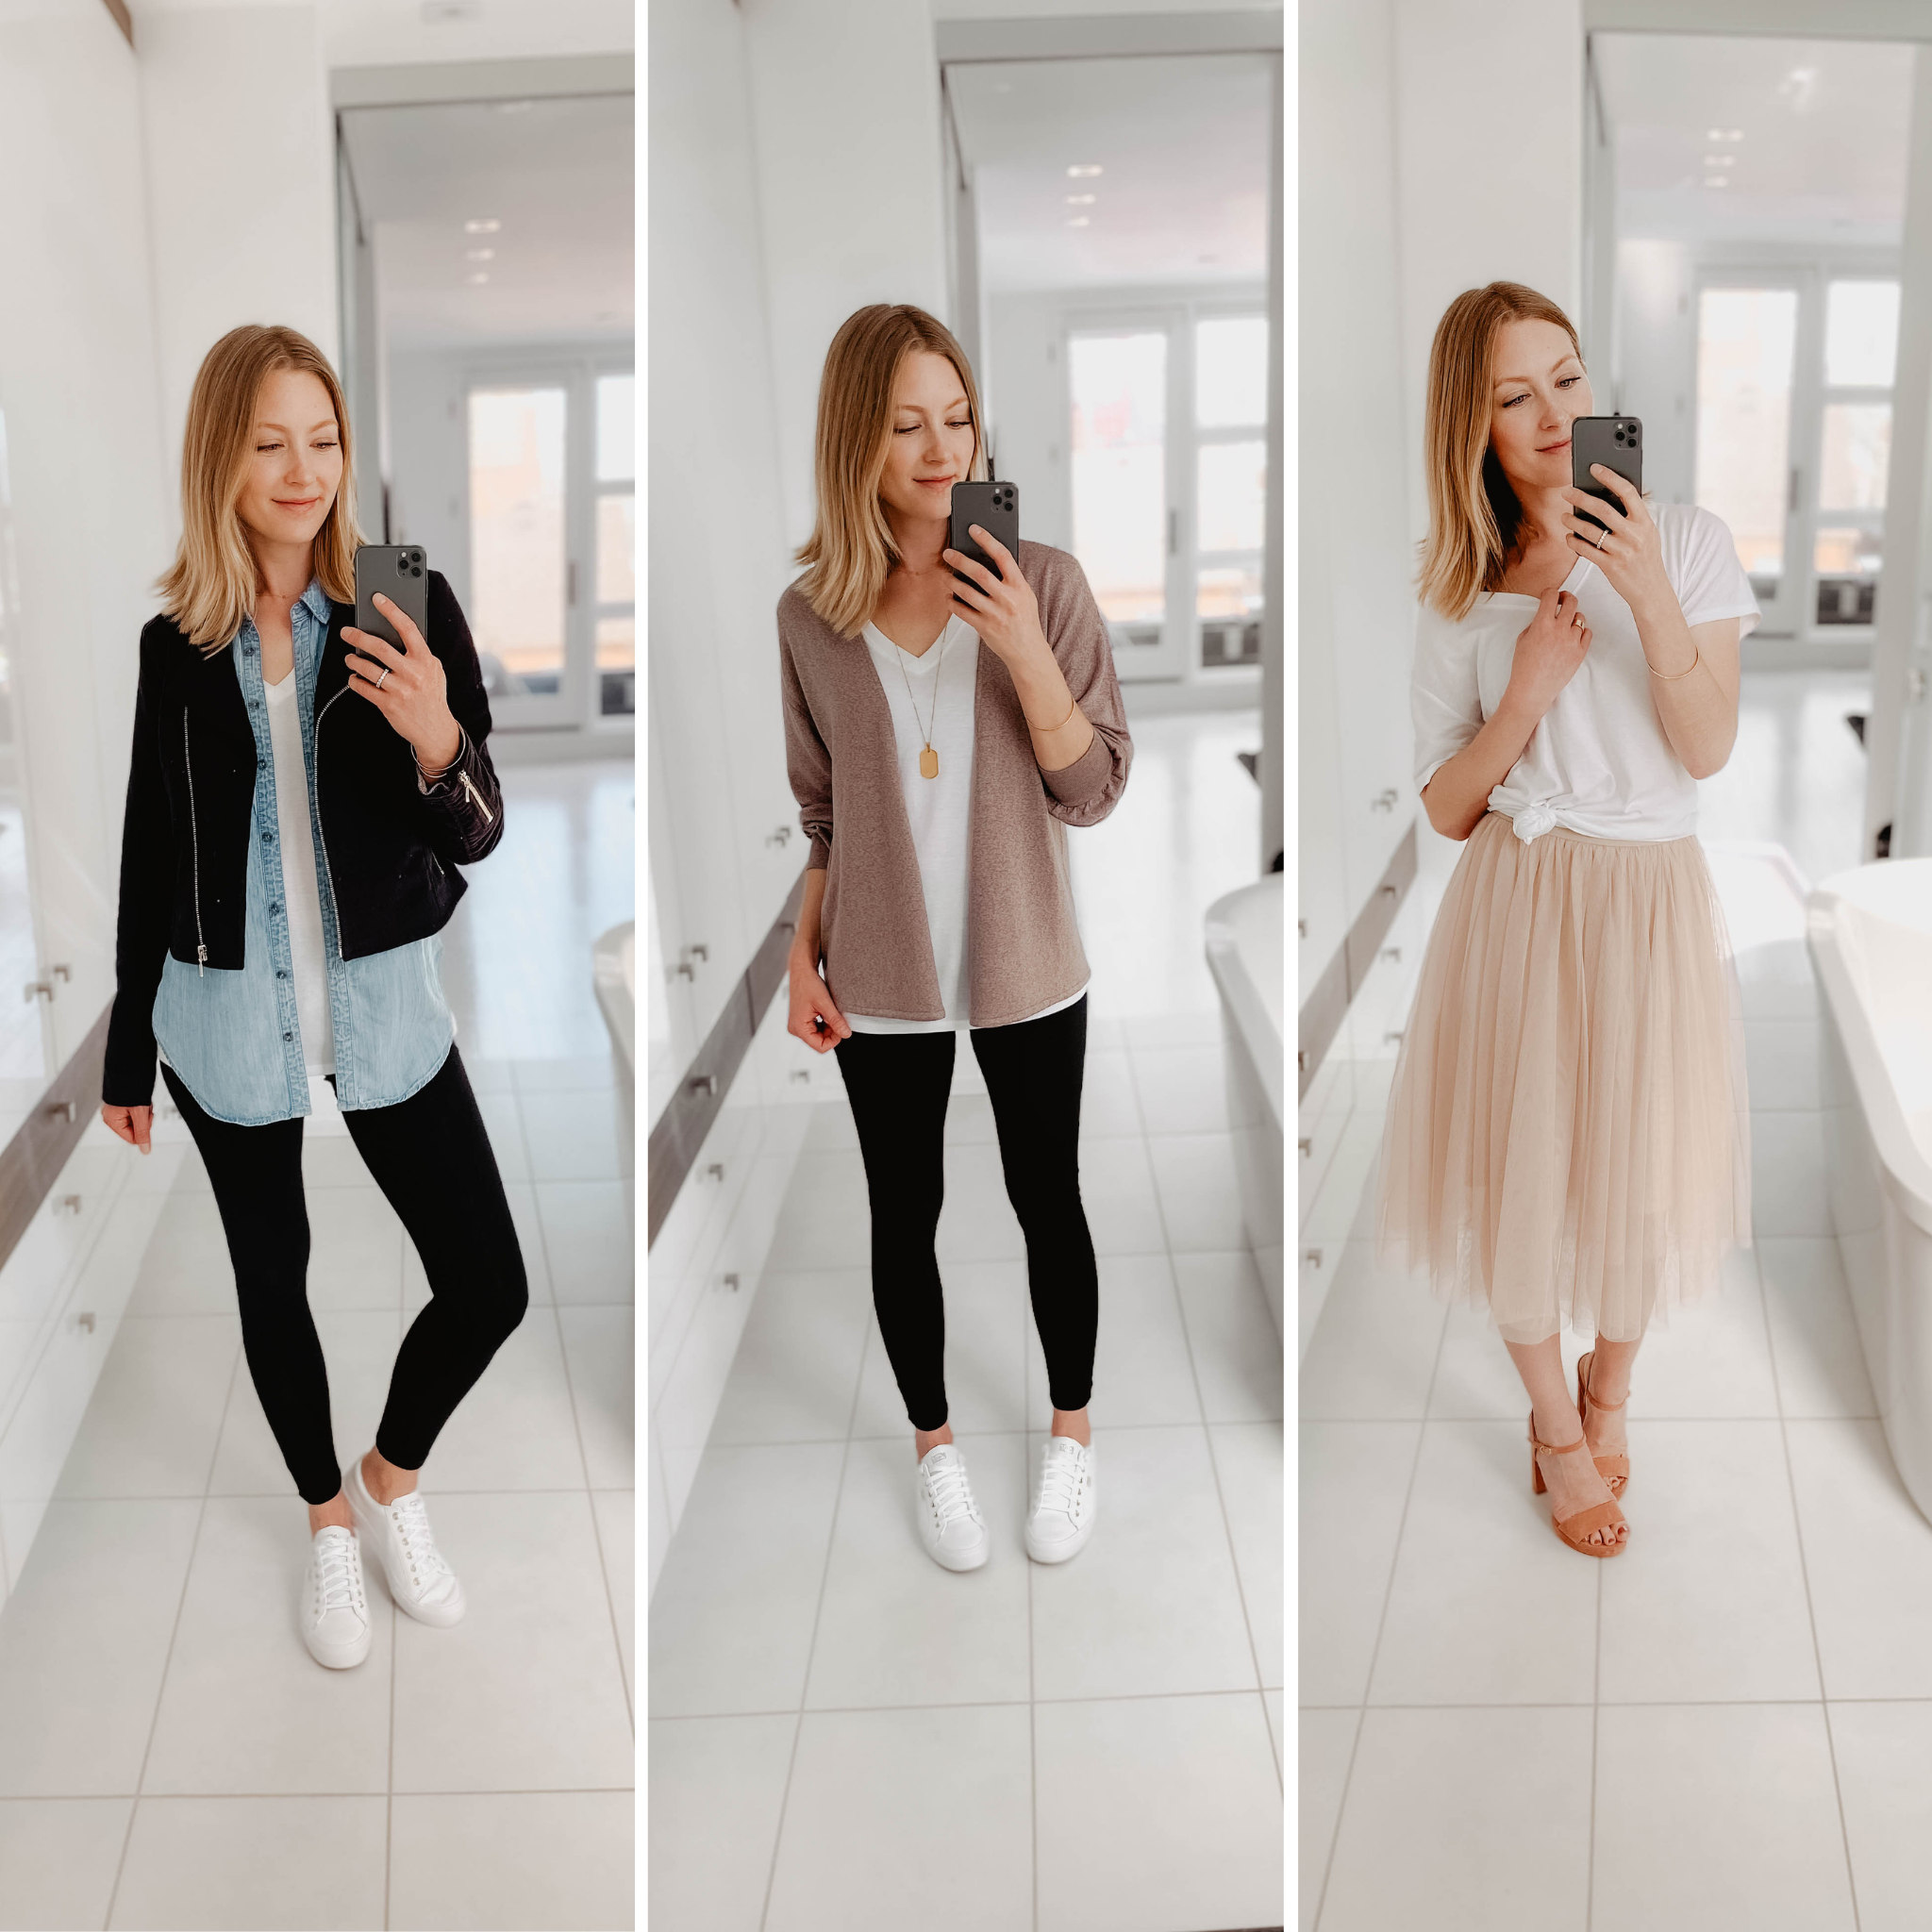 7 Casual Outfits For Women: Smart-Casual Influencer Outfits